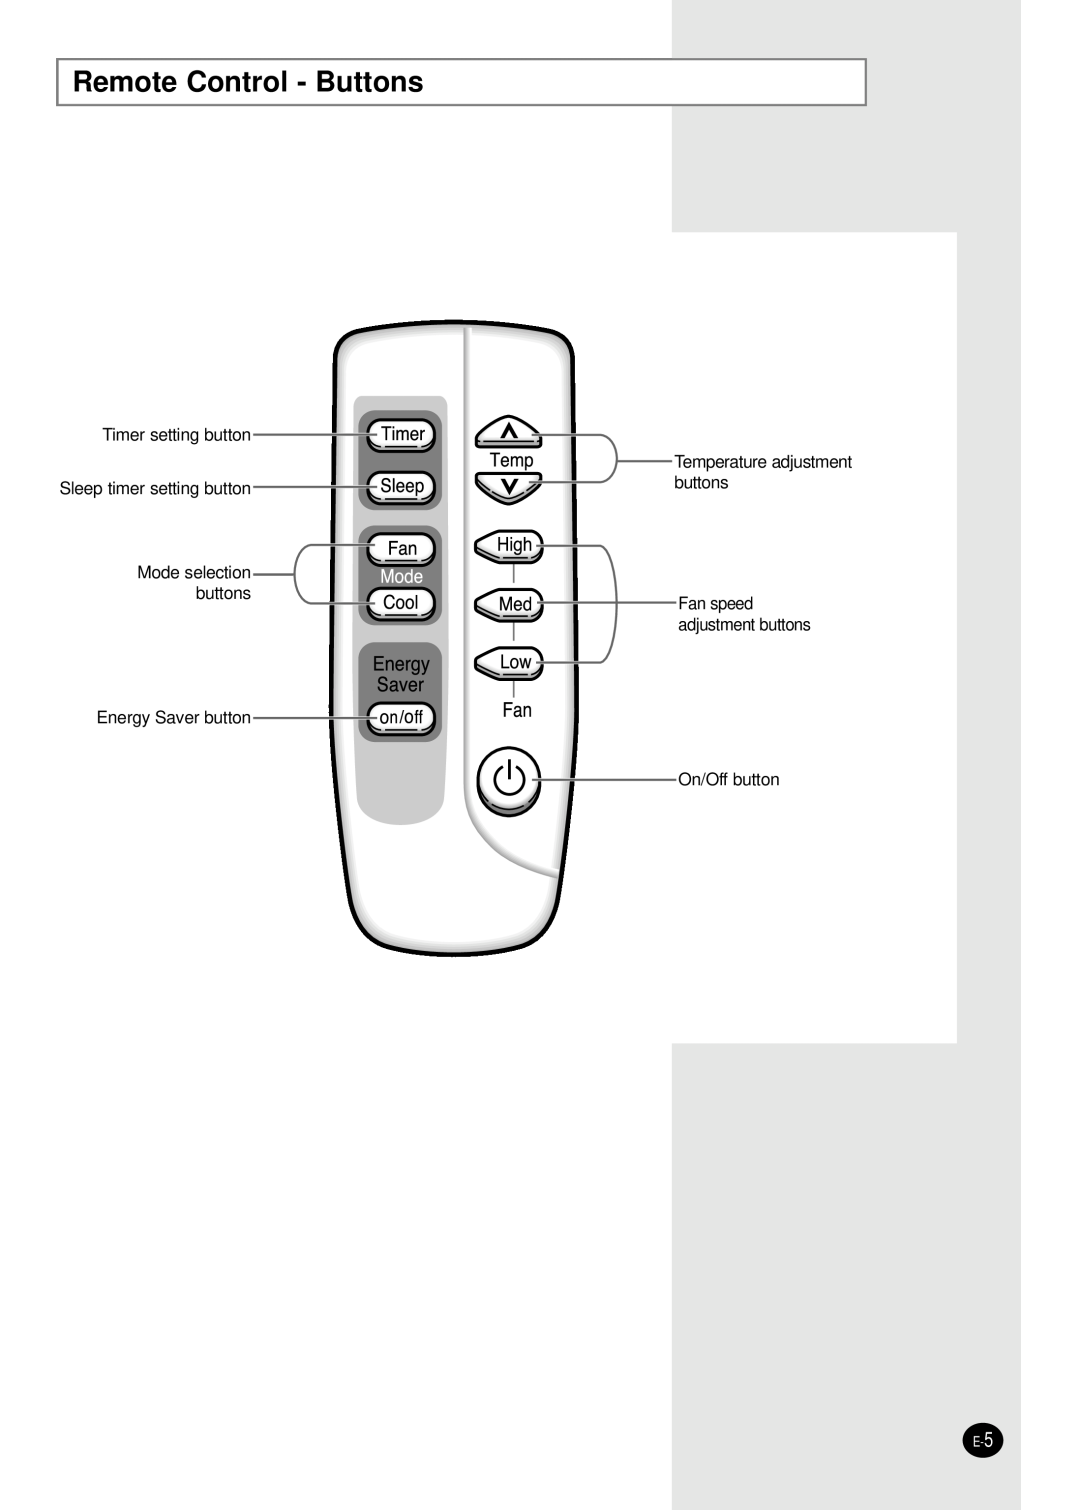 Samsung AW1801B Remote Control - Buttons, Timer setting button Sleep timer setting button, Temperature adjustment buttons 